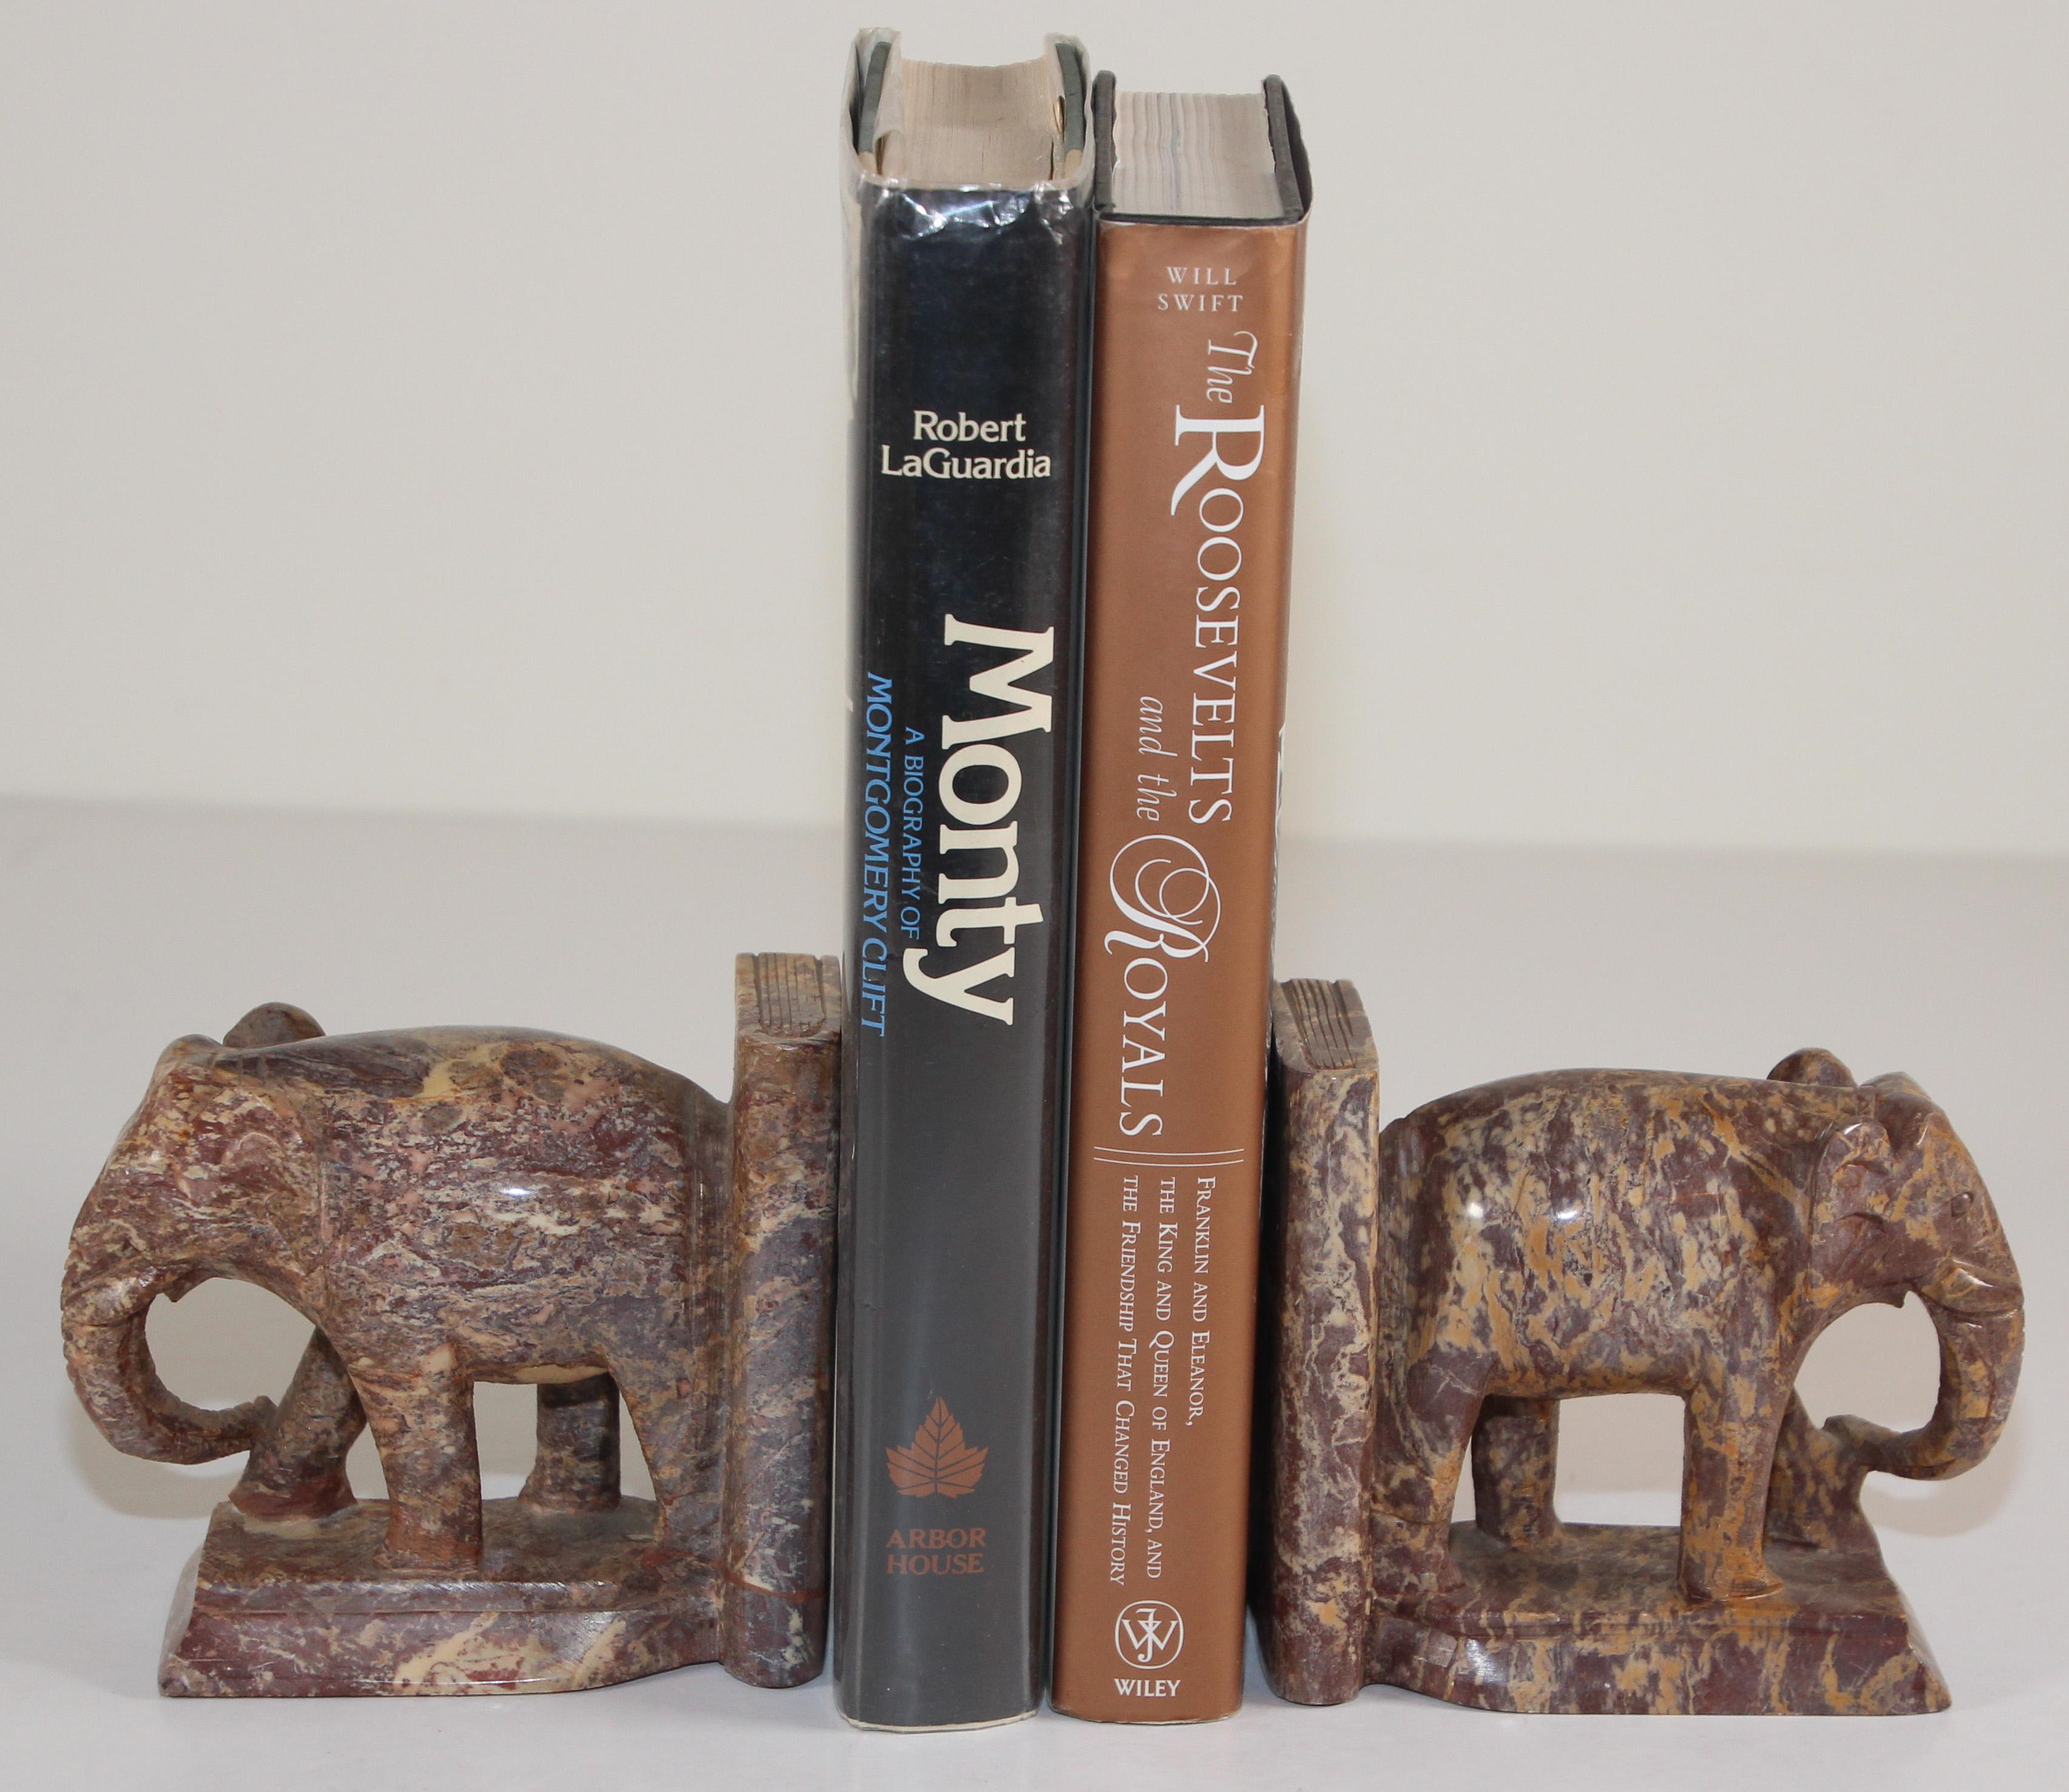 marble elephant bookends